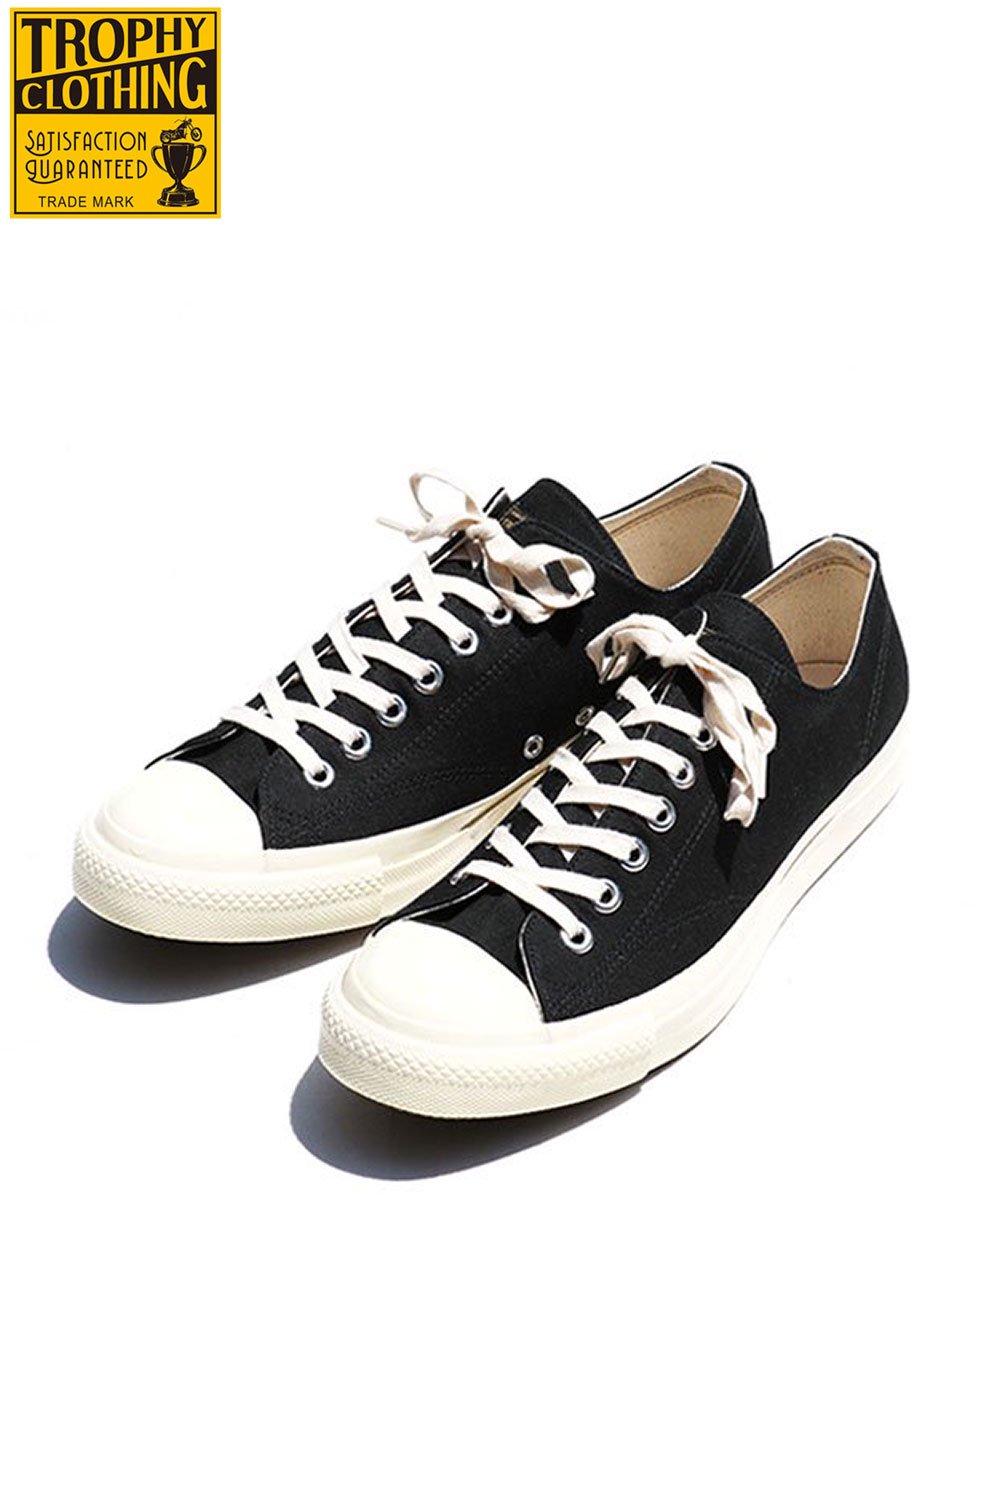 TROPHY CLOTHING(トロフィークロージング) スニーカー MILL TRAINERS 